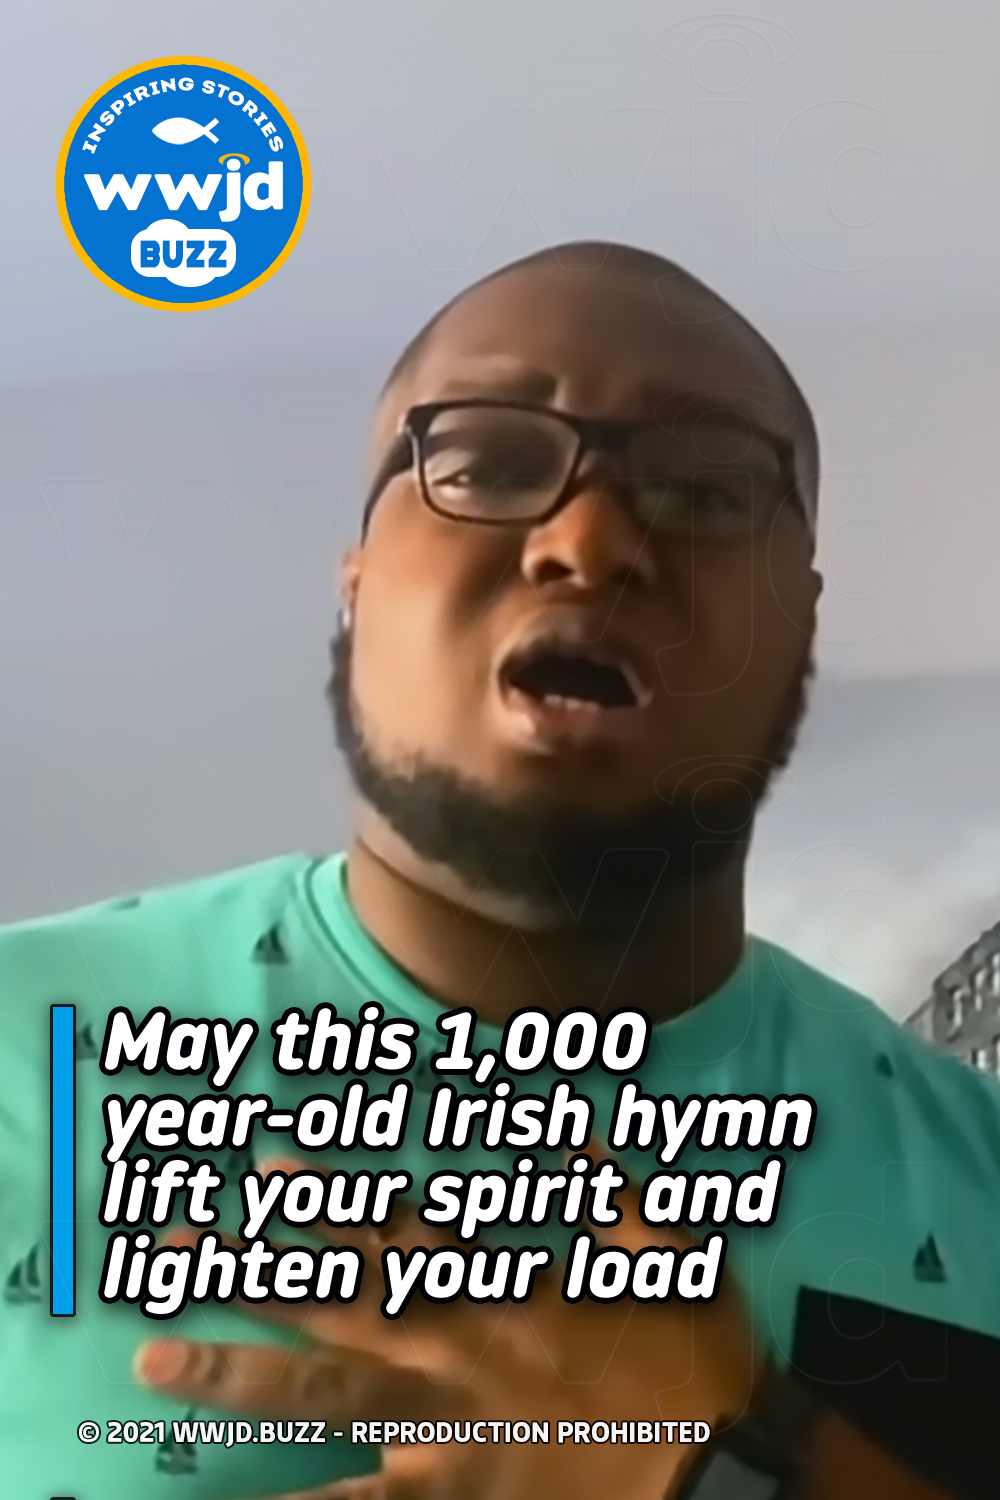 May this 1,000 year-old Irish hymn lift your spirit and lighten your load